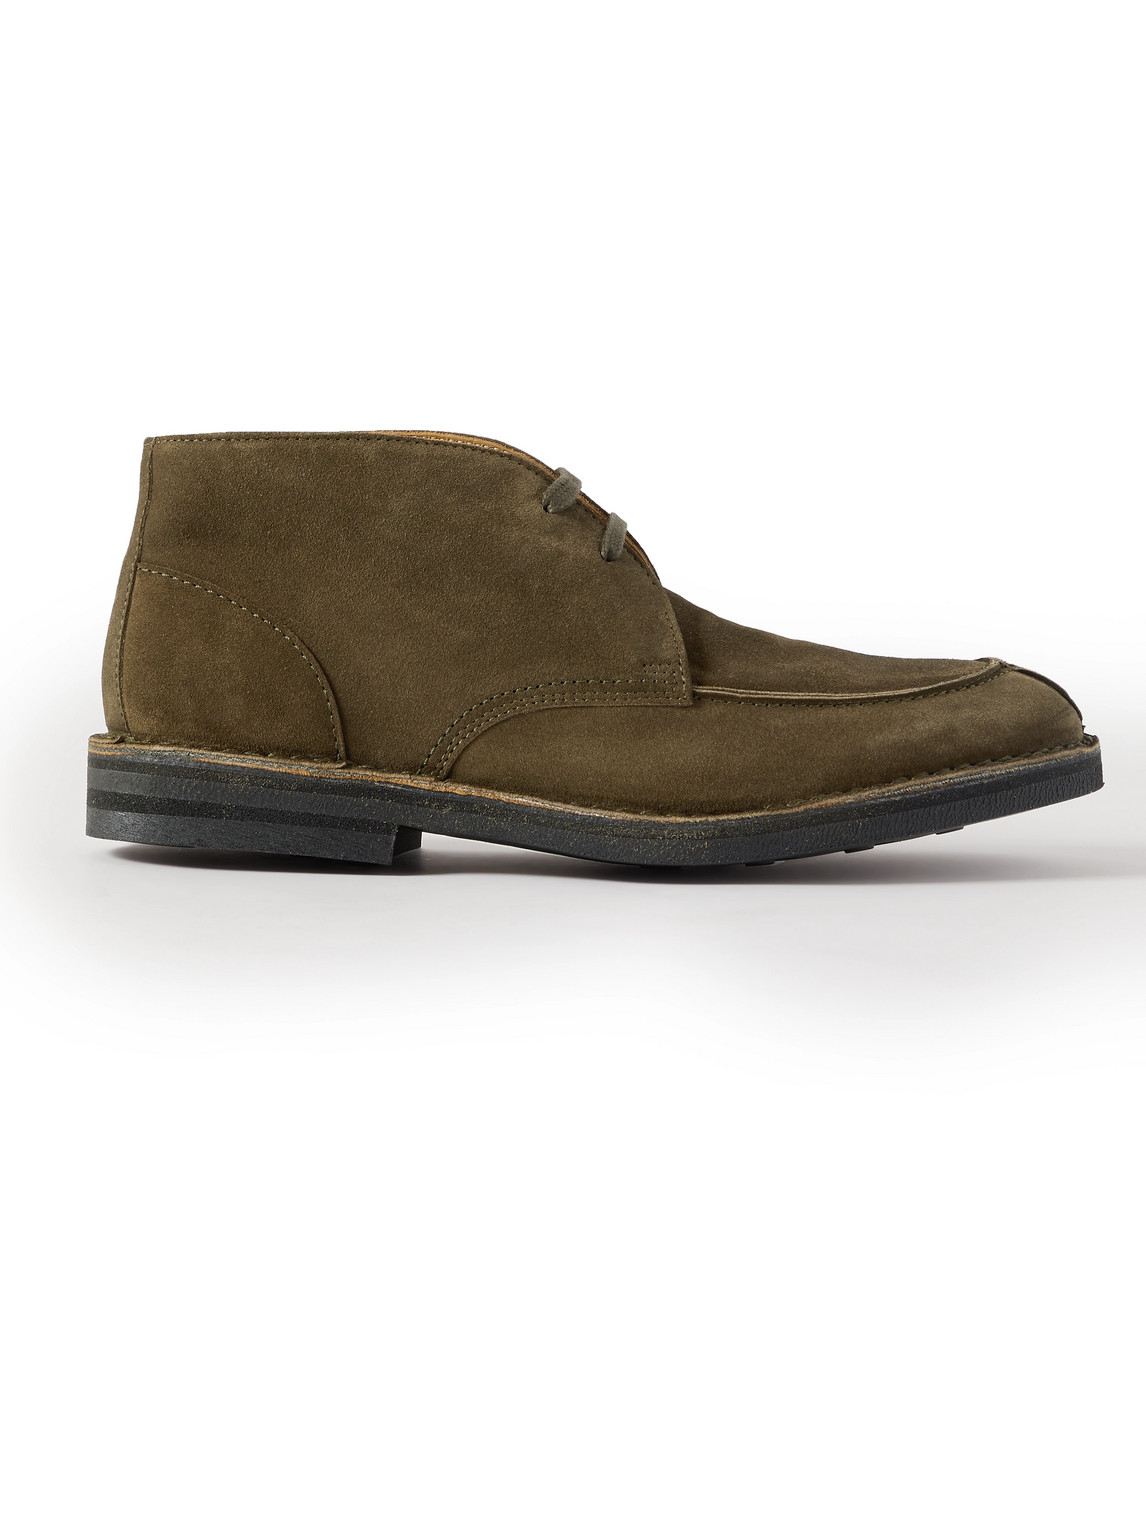 Andrew Split-Toe Shearling-Lined Regenerated Suede by evolo® Chukka Boots